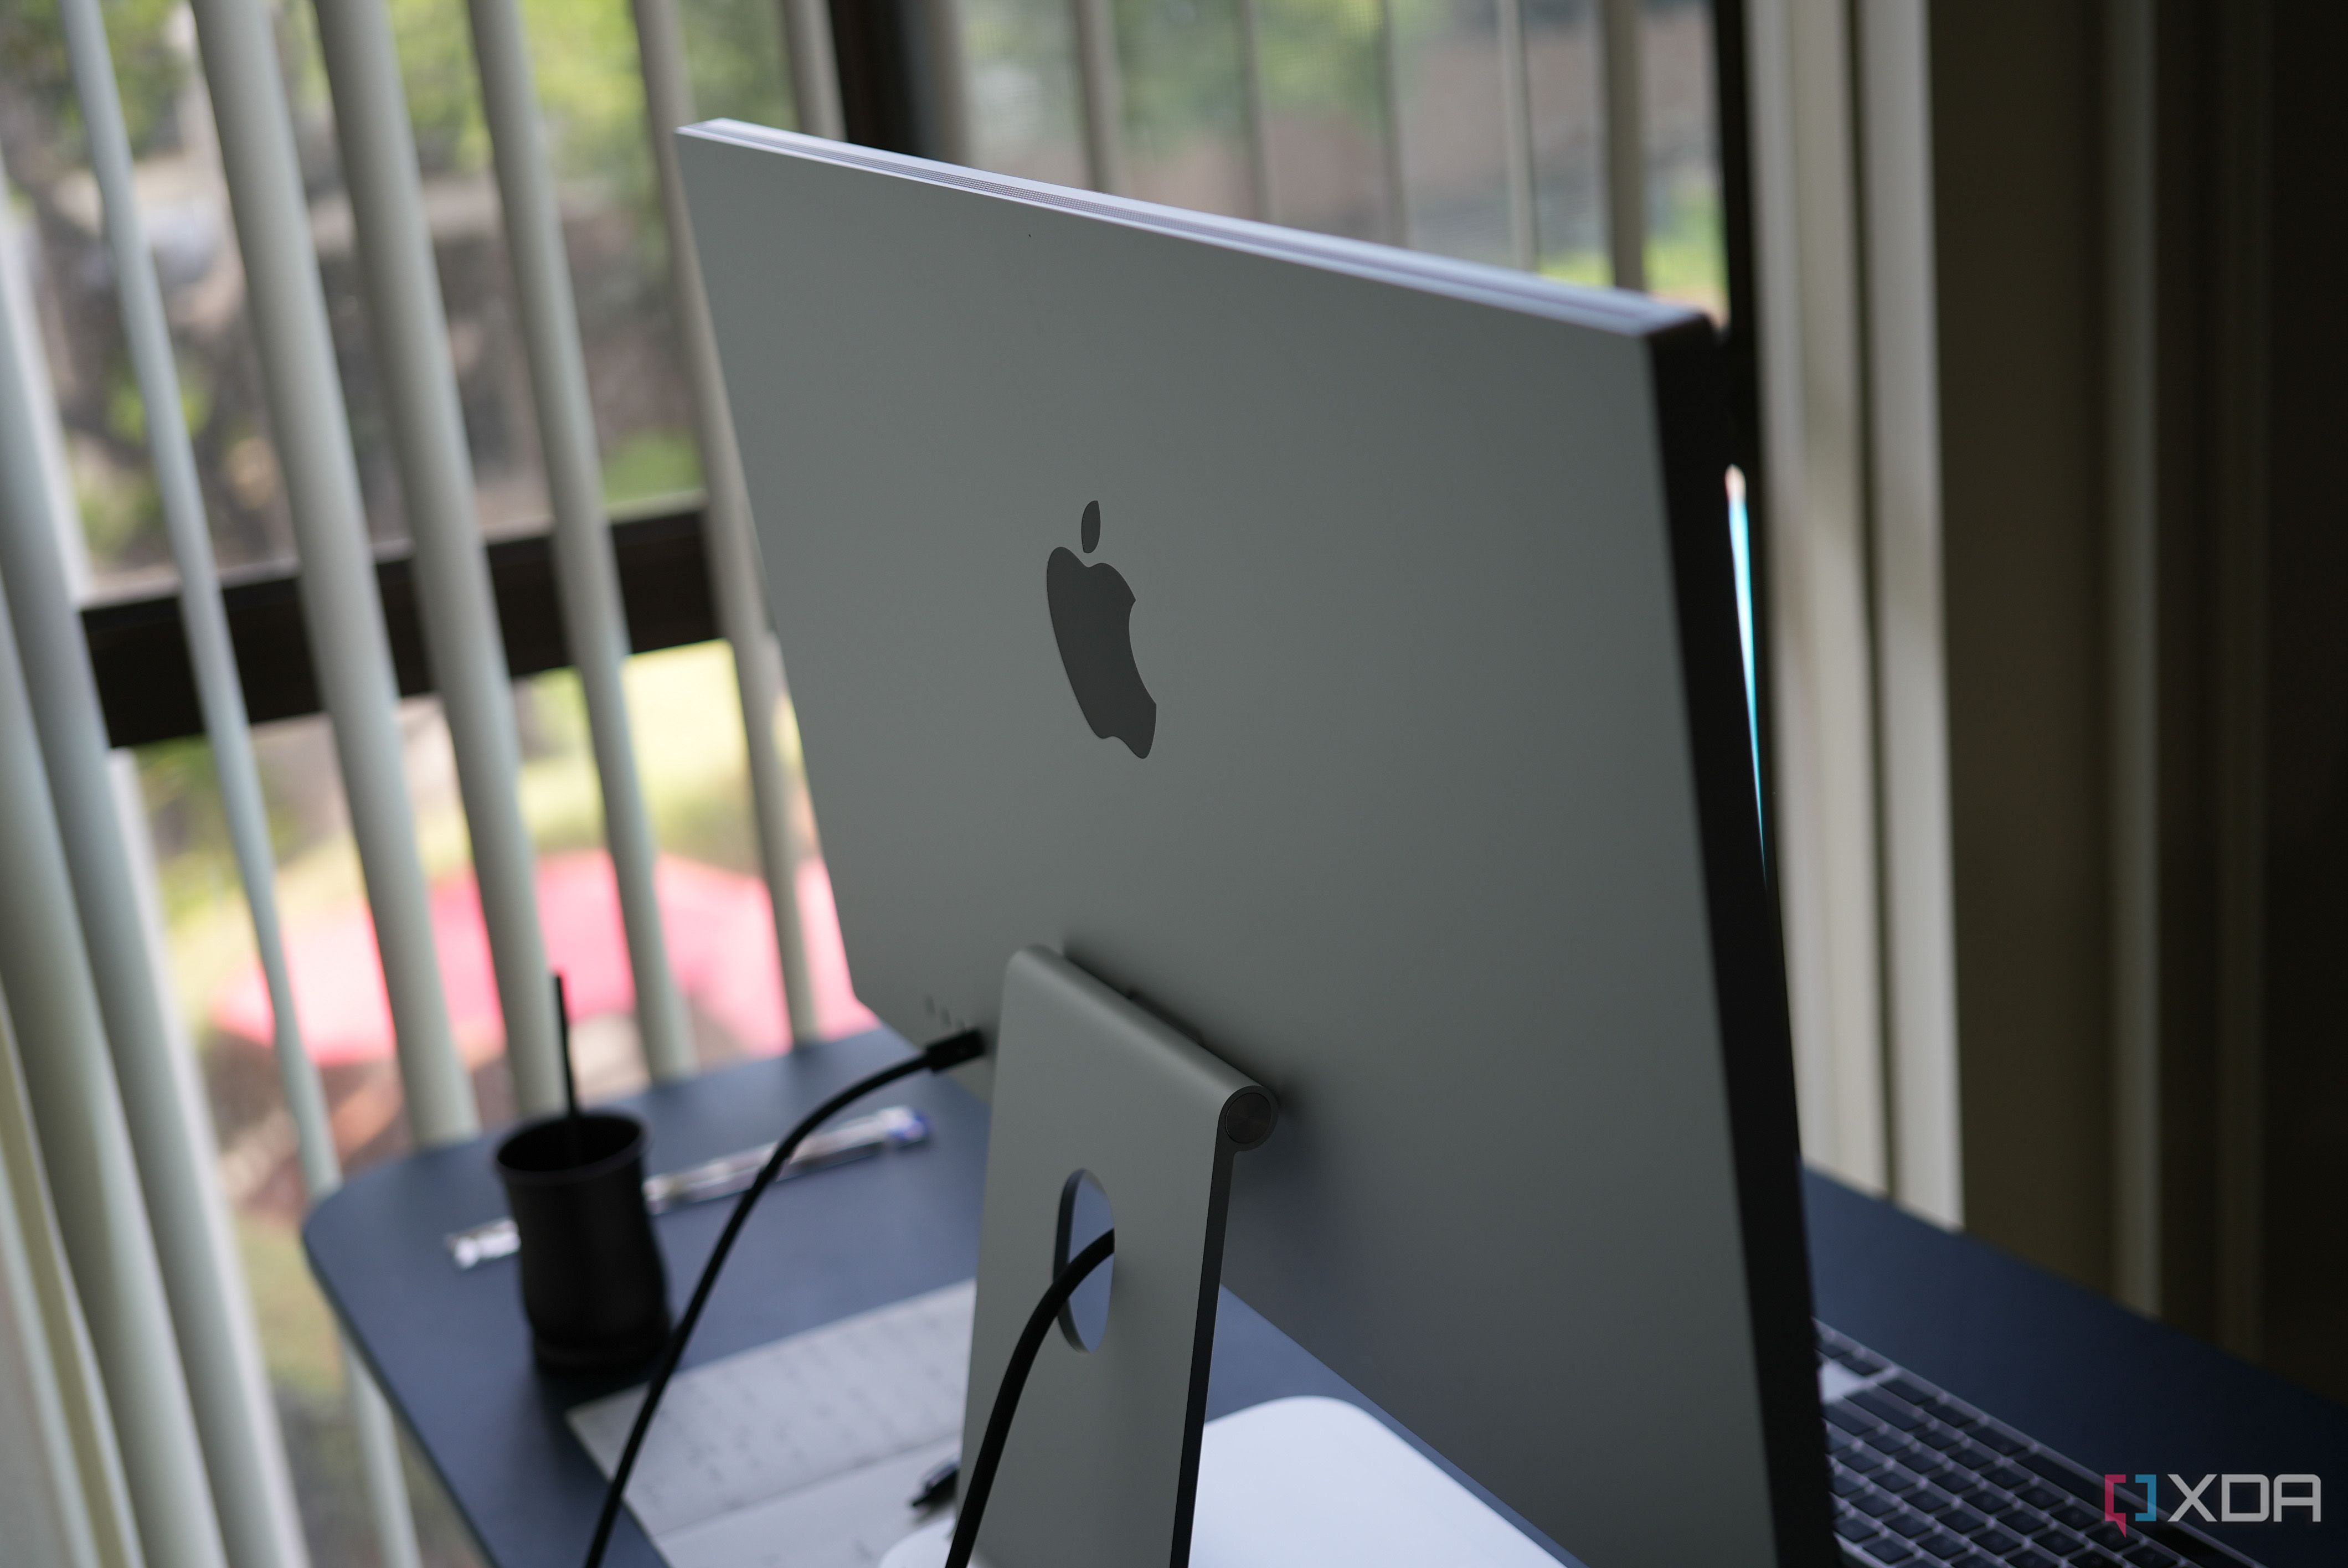 New 32-inch iMac Pro Expected in 2024 or 2025 - MacRumors